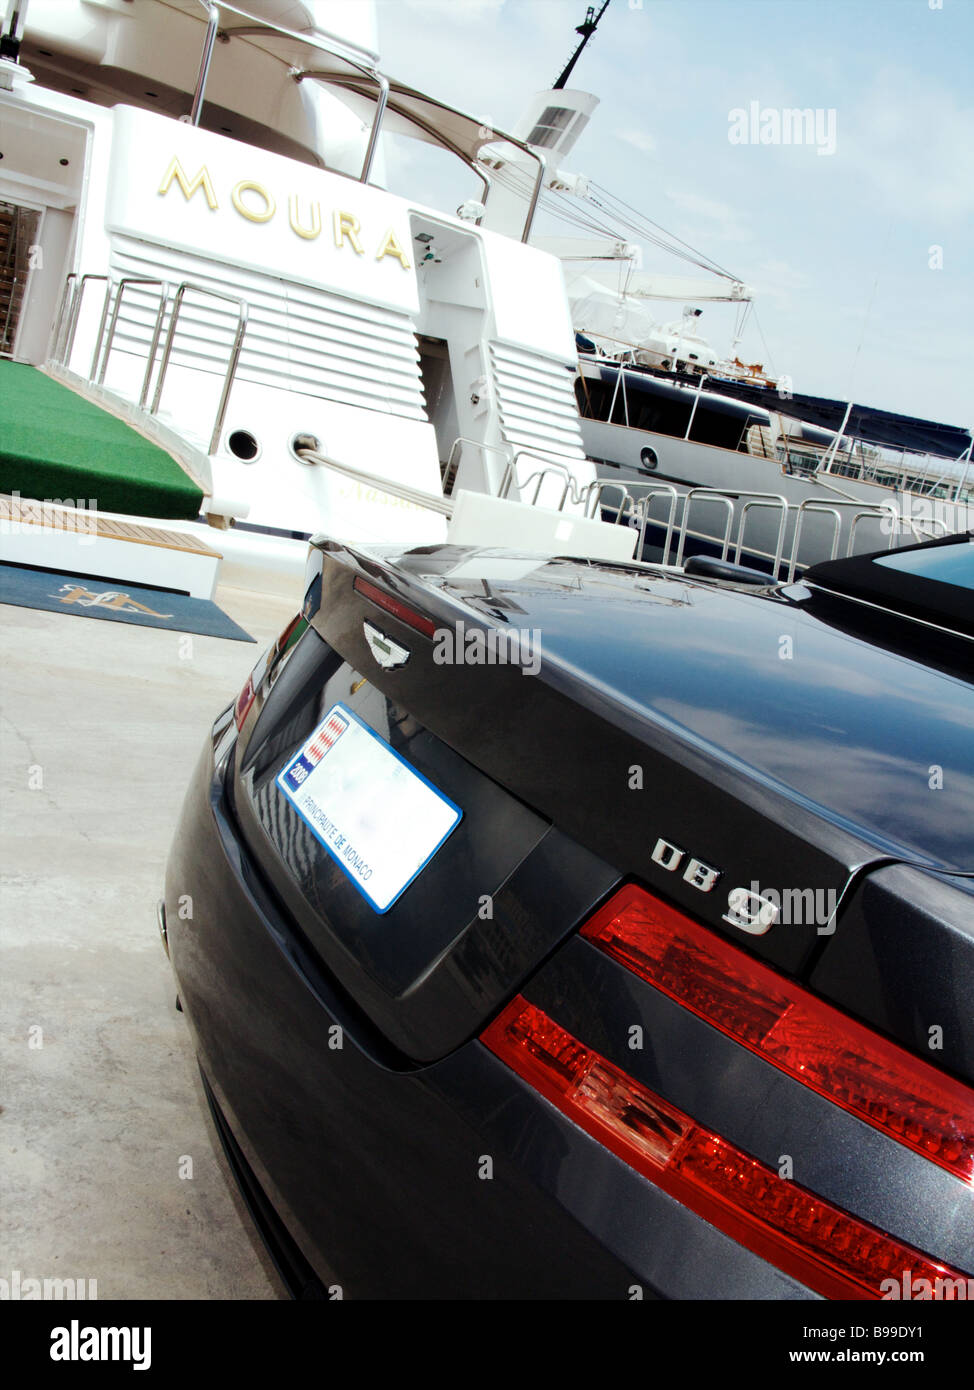 A blue Aston Martin DB9 parked alongside the Lady Moura luxury super yacht moored in the port of Monaco Monte Carlo. Stock Photo